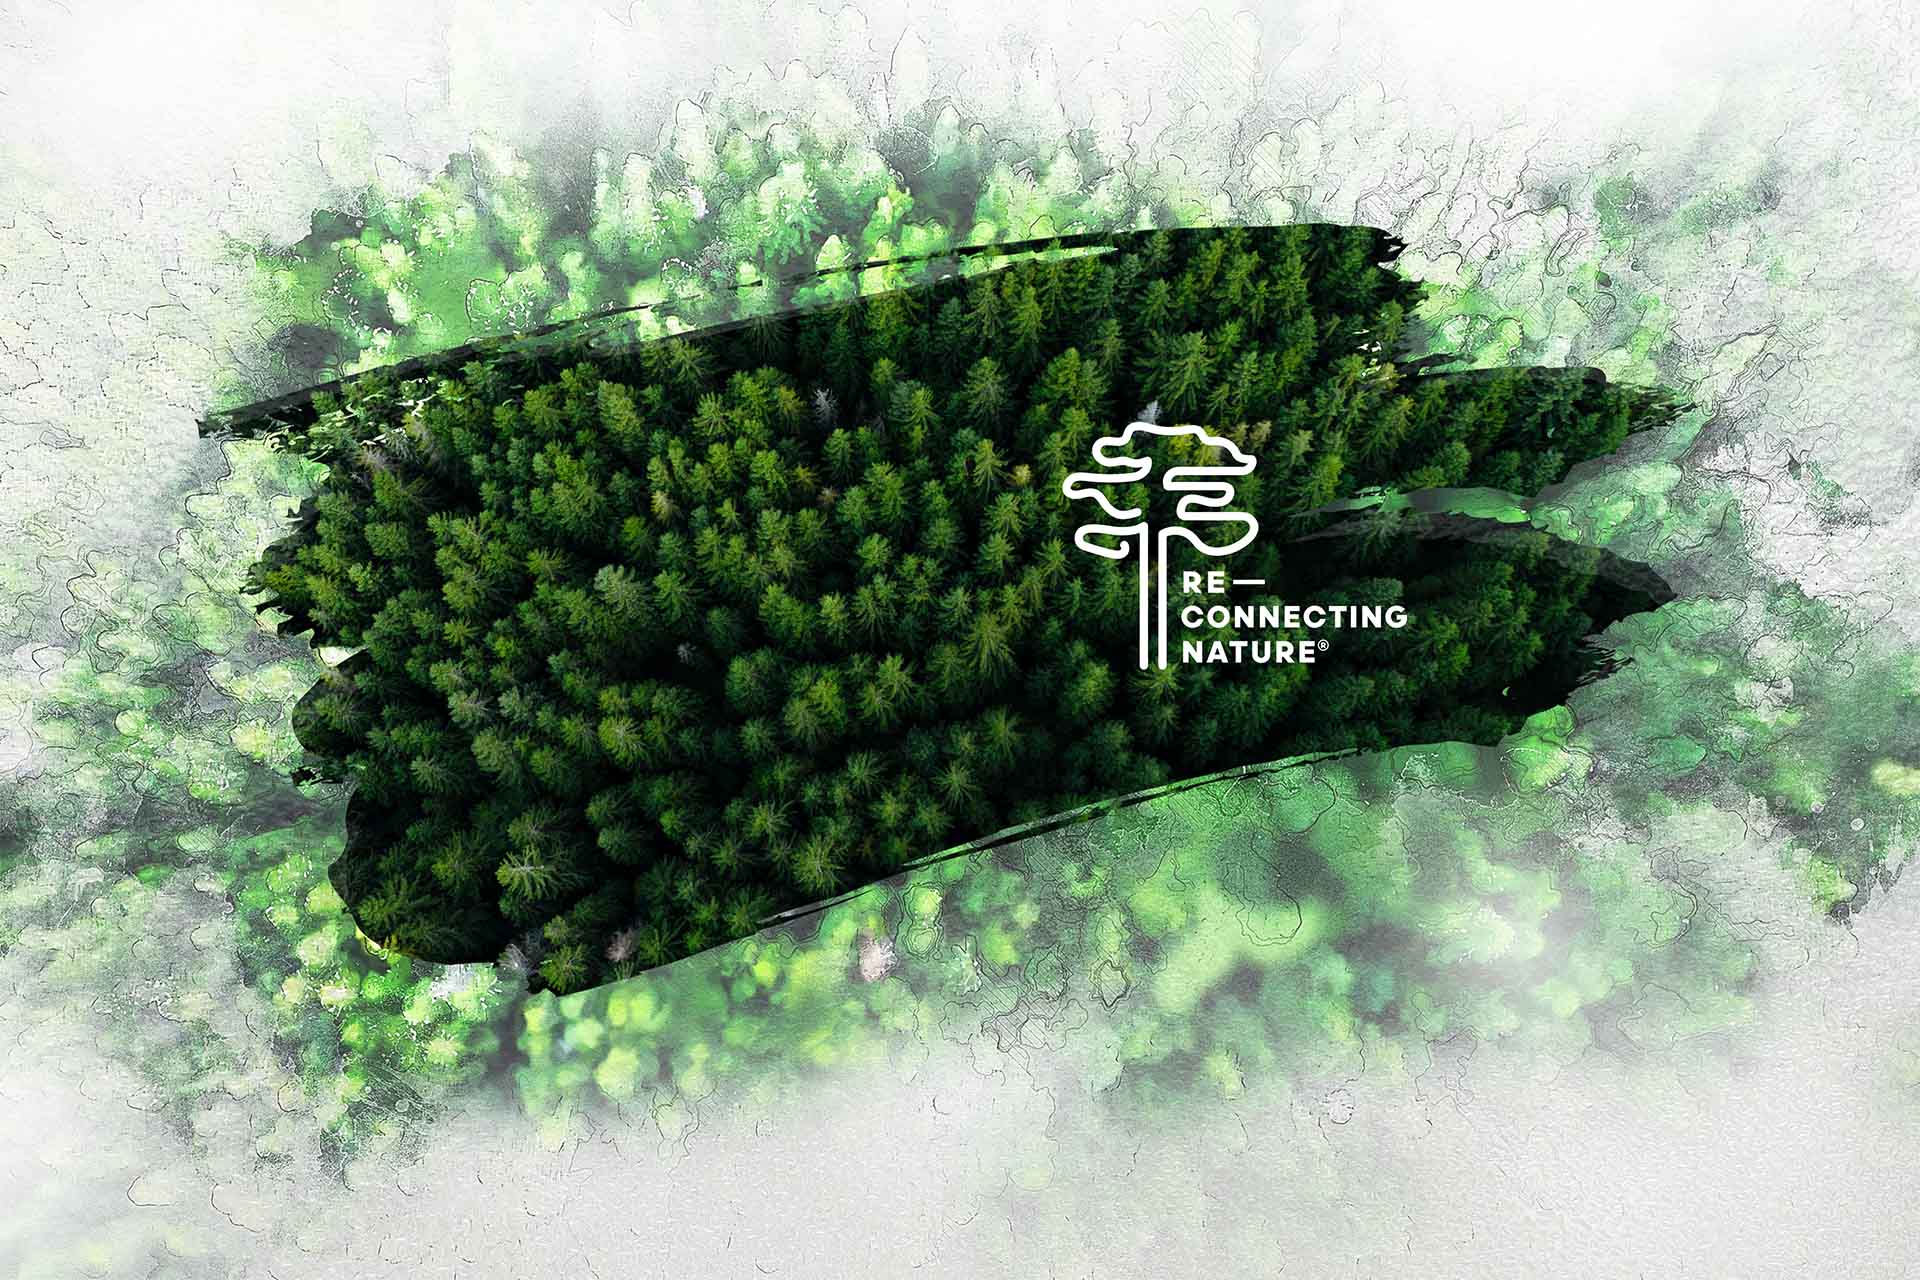 Forest and Re-Connecting Nature logo.